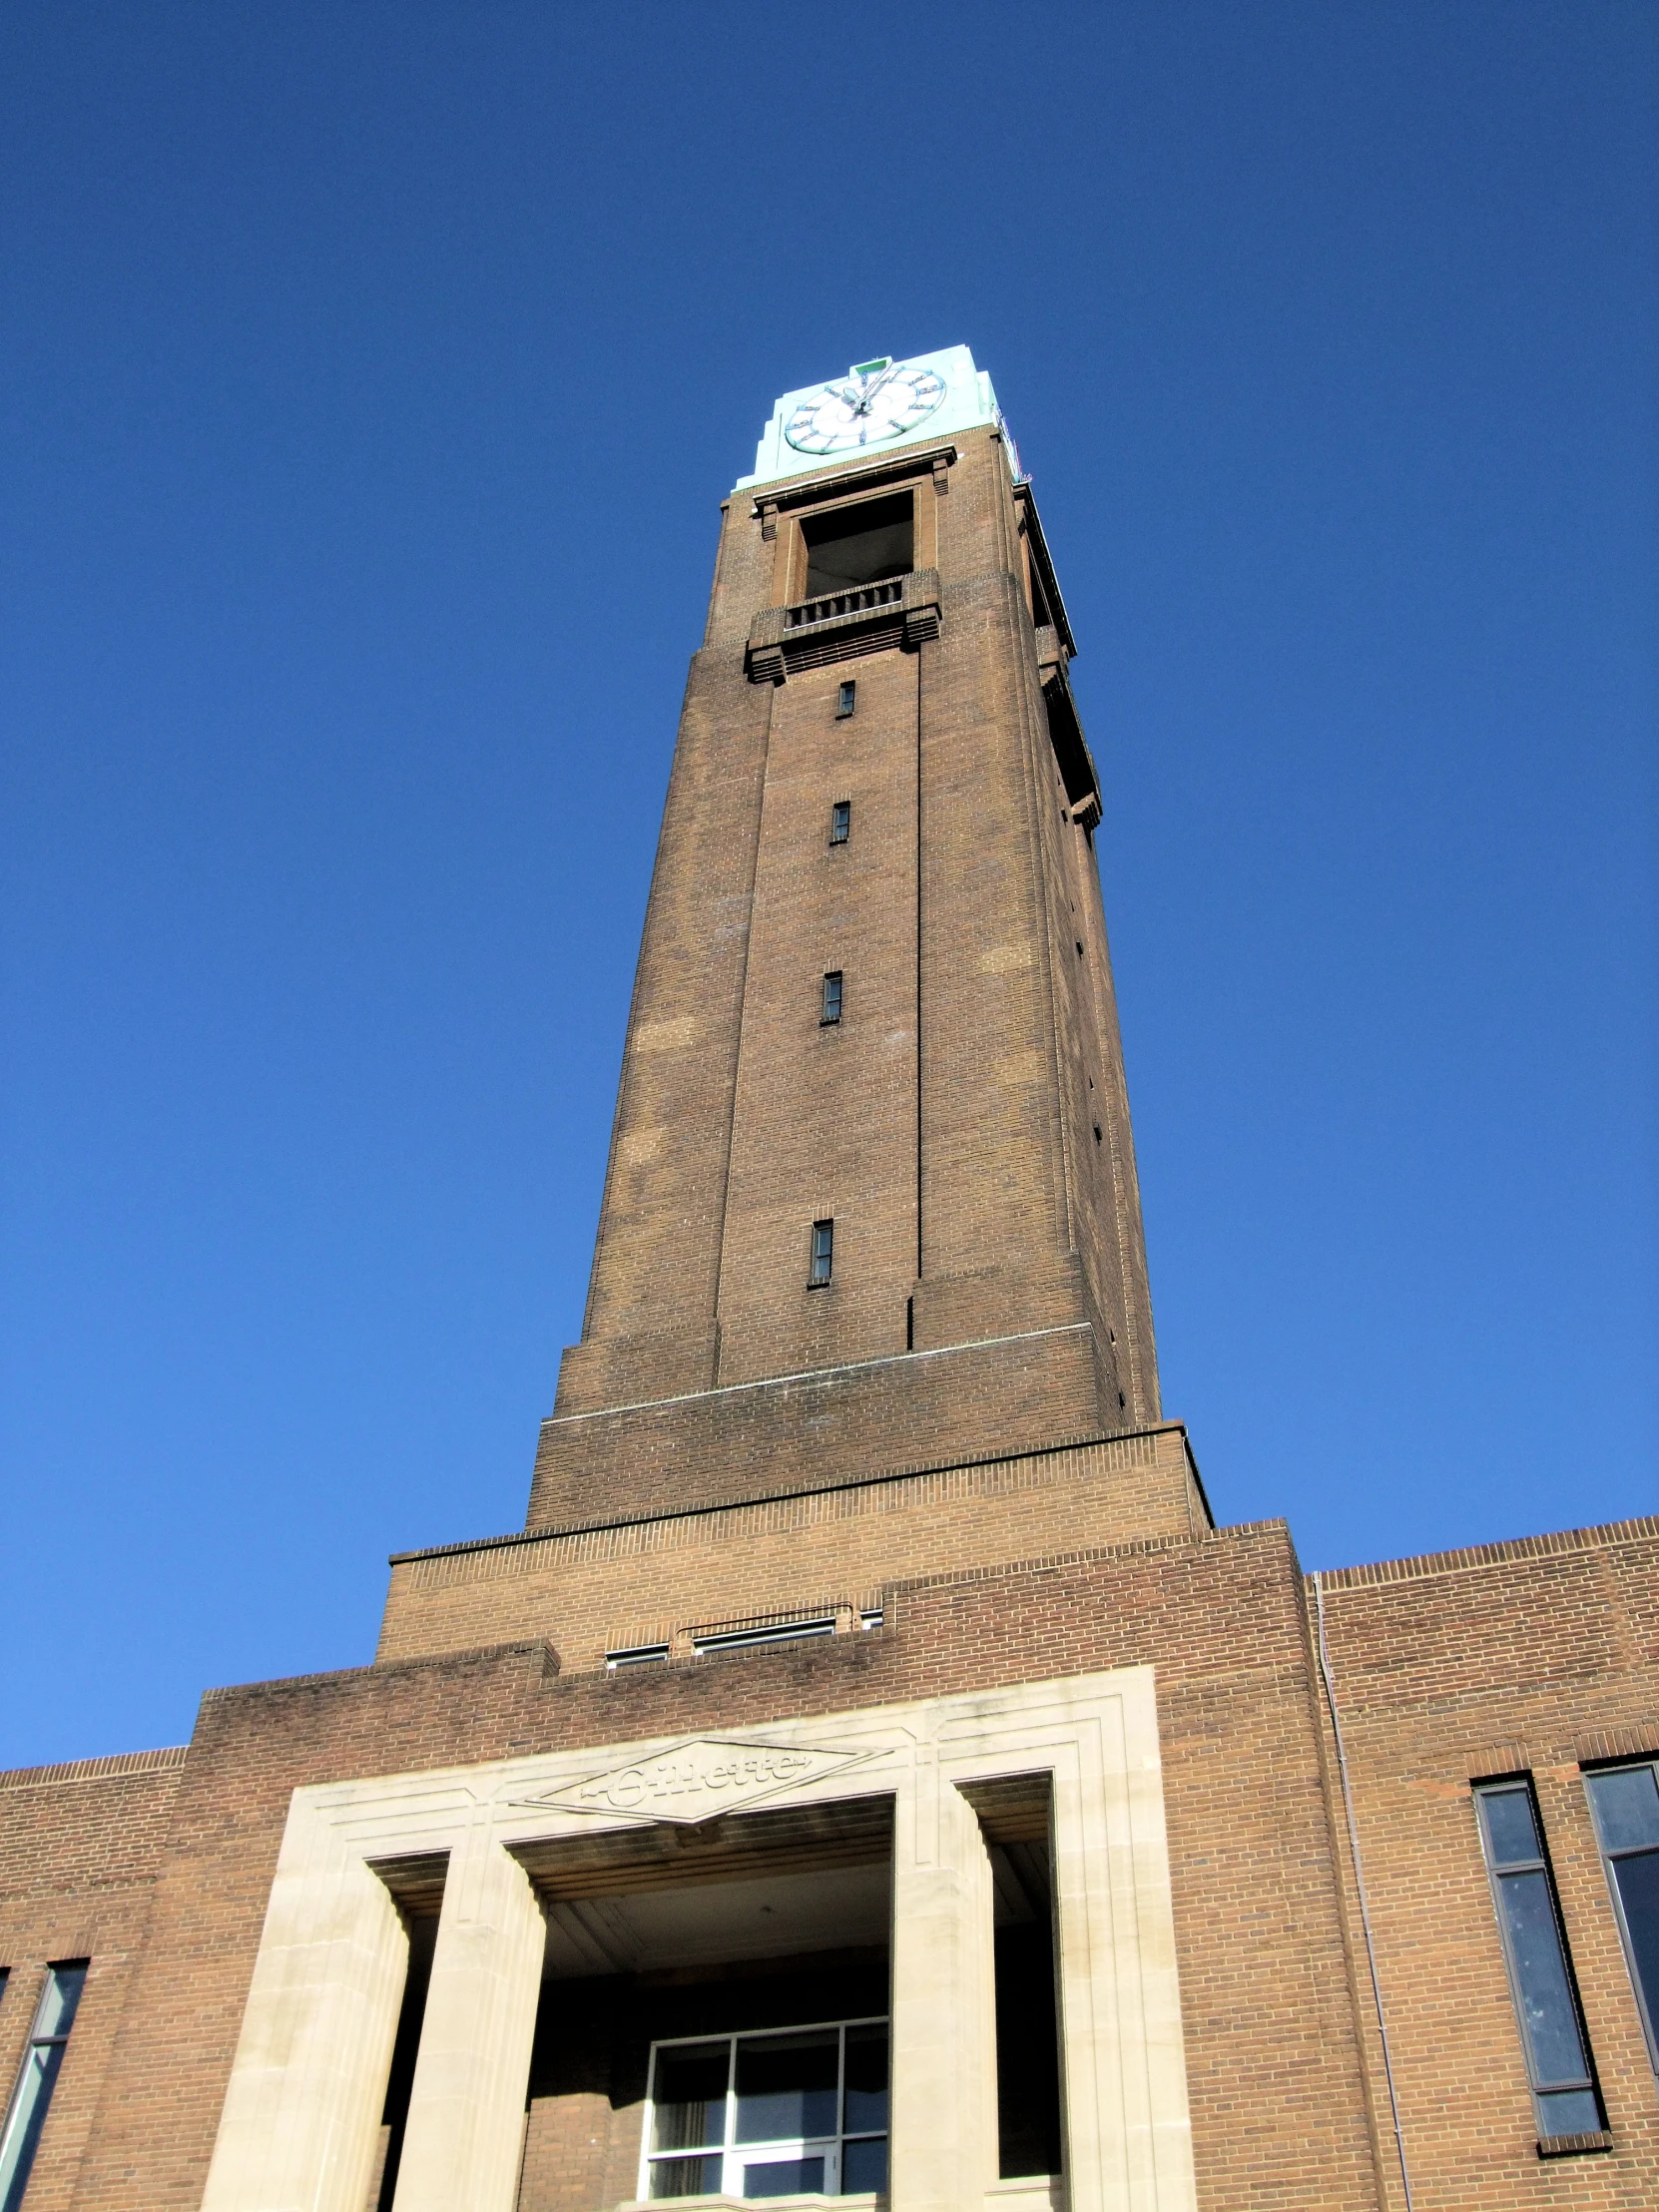 an upward view of a clock tower that is built into the side of a building